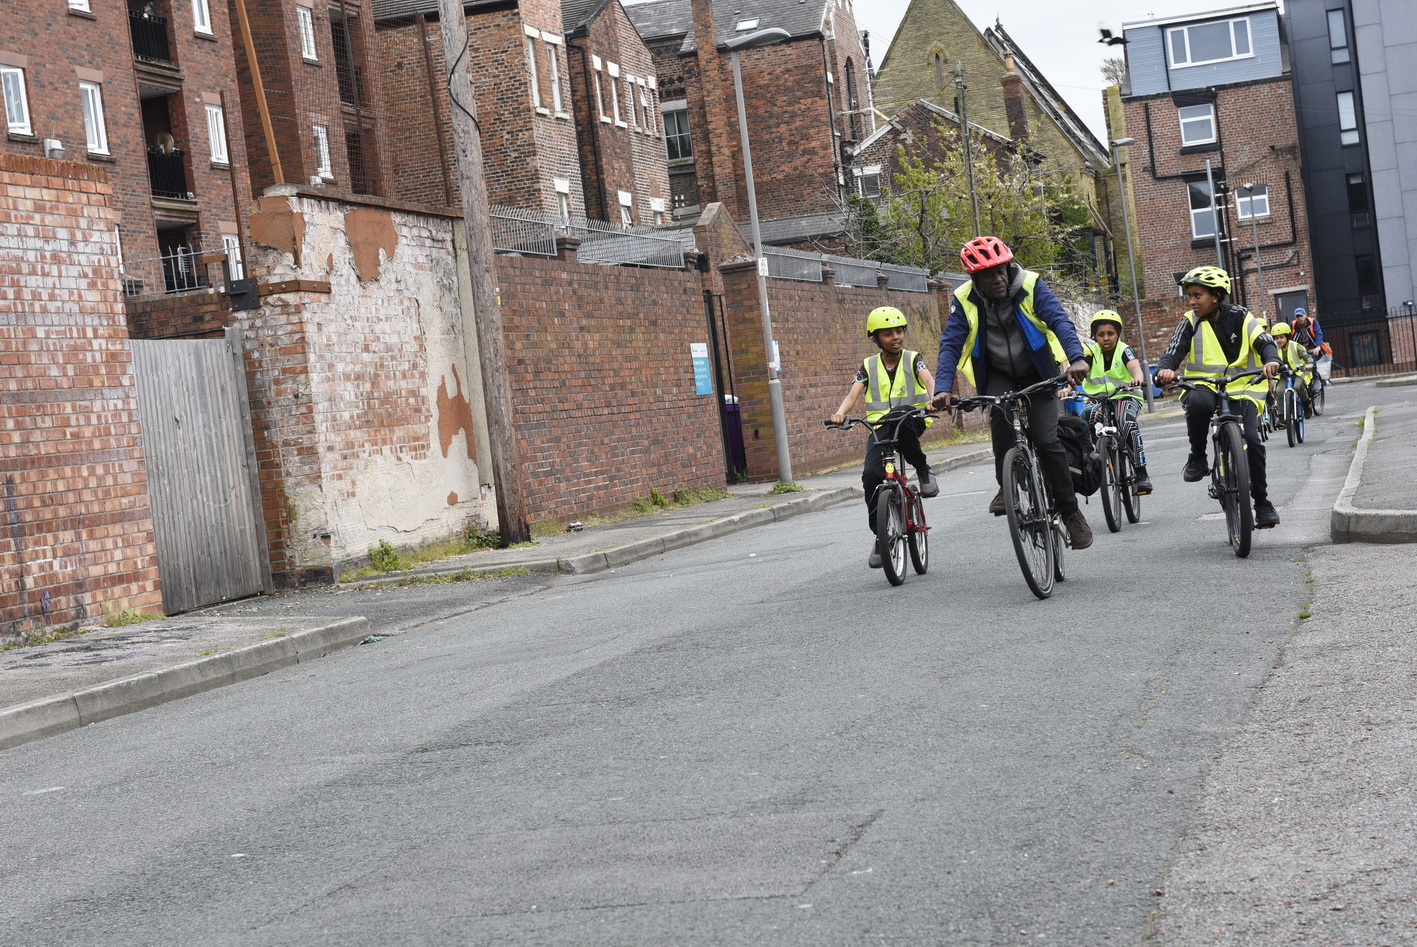 A man wearing a red cycle helmet and yellow high vis cycles ahead of a group of young boys riding bikes and wearing high vis vests.